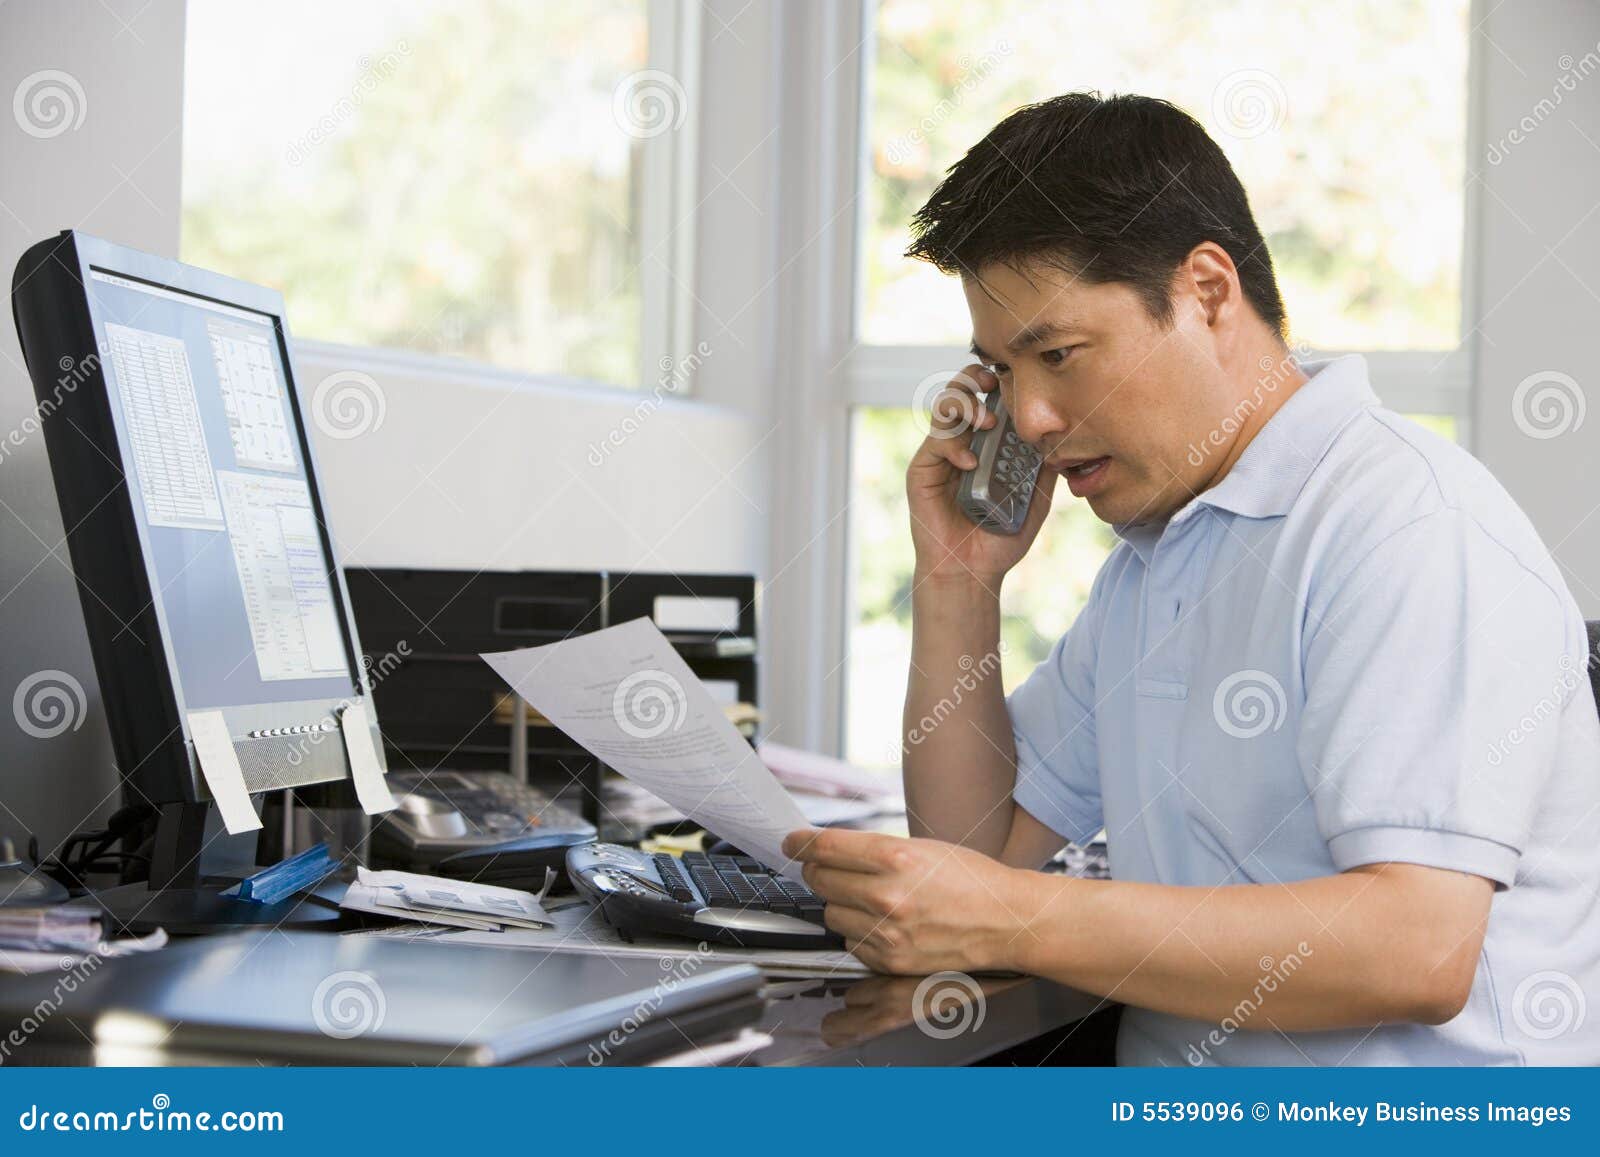 man in home office with computer and paperwork